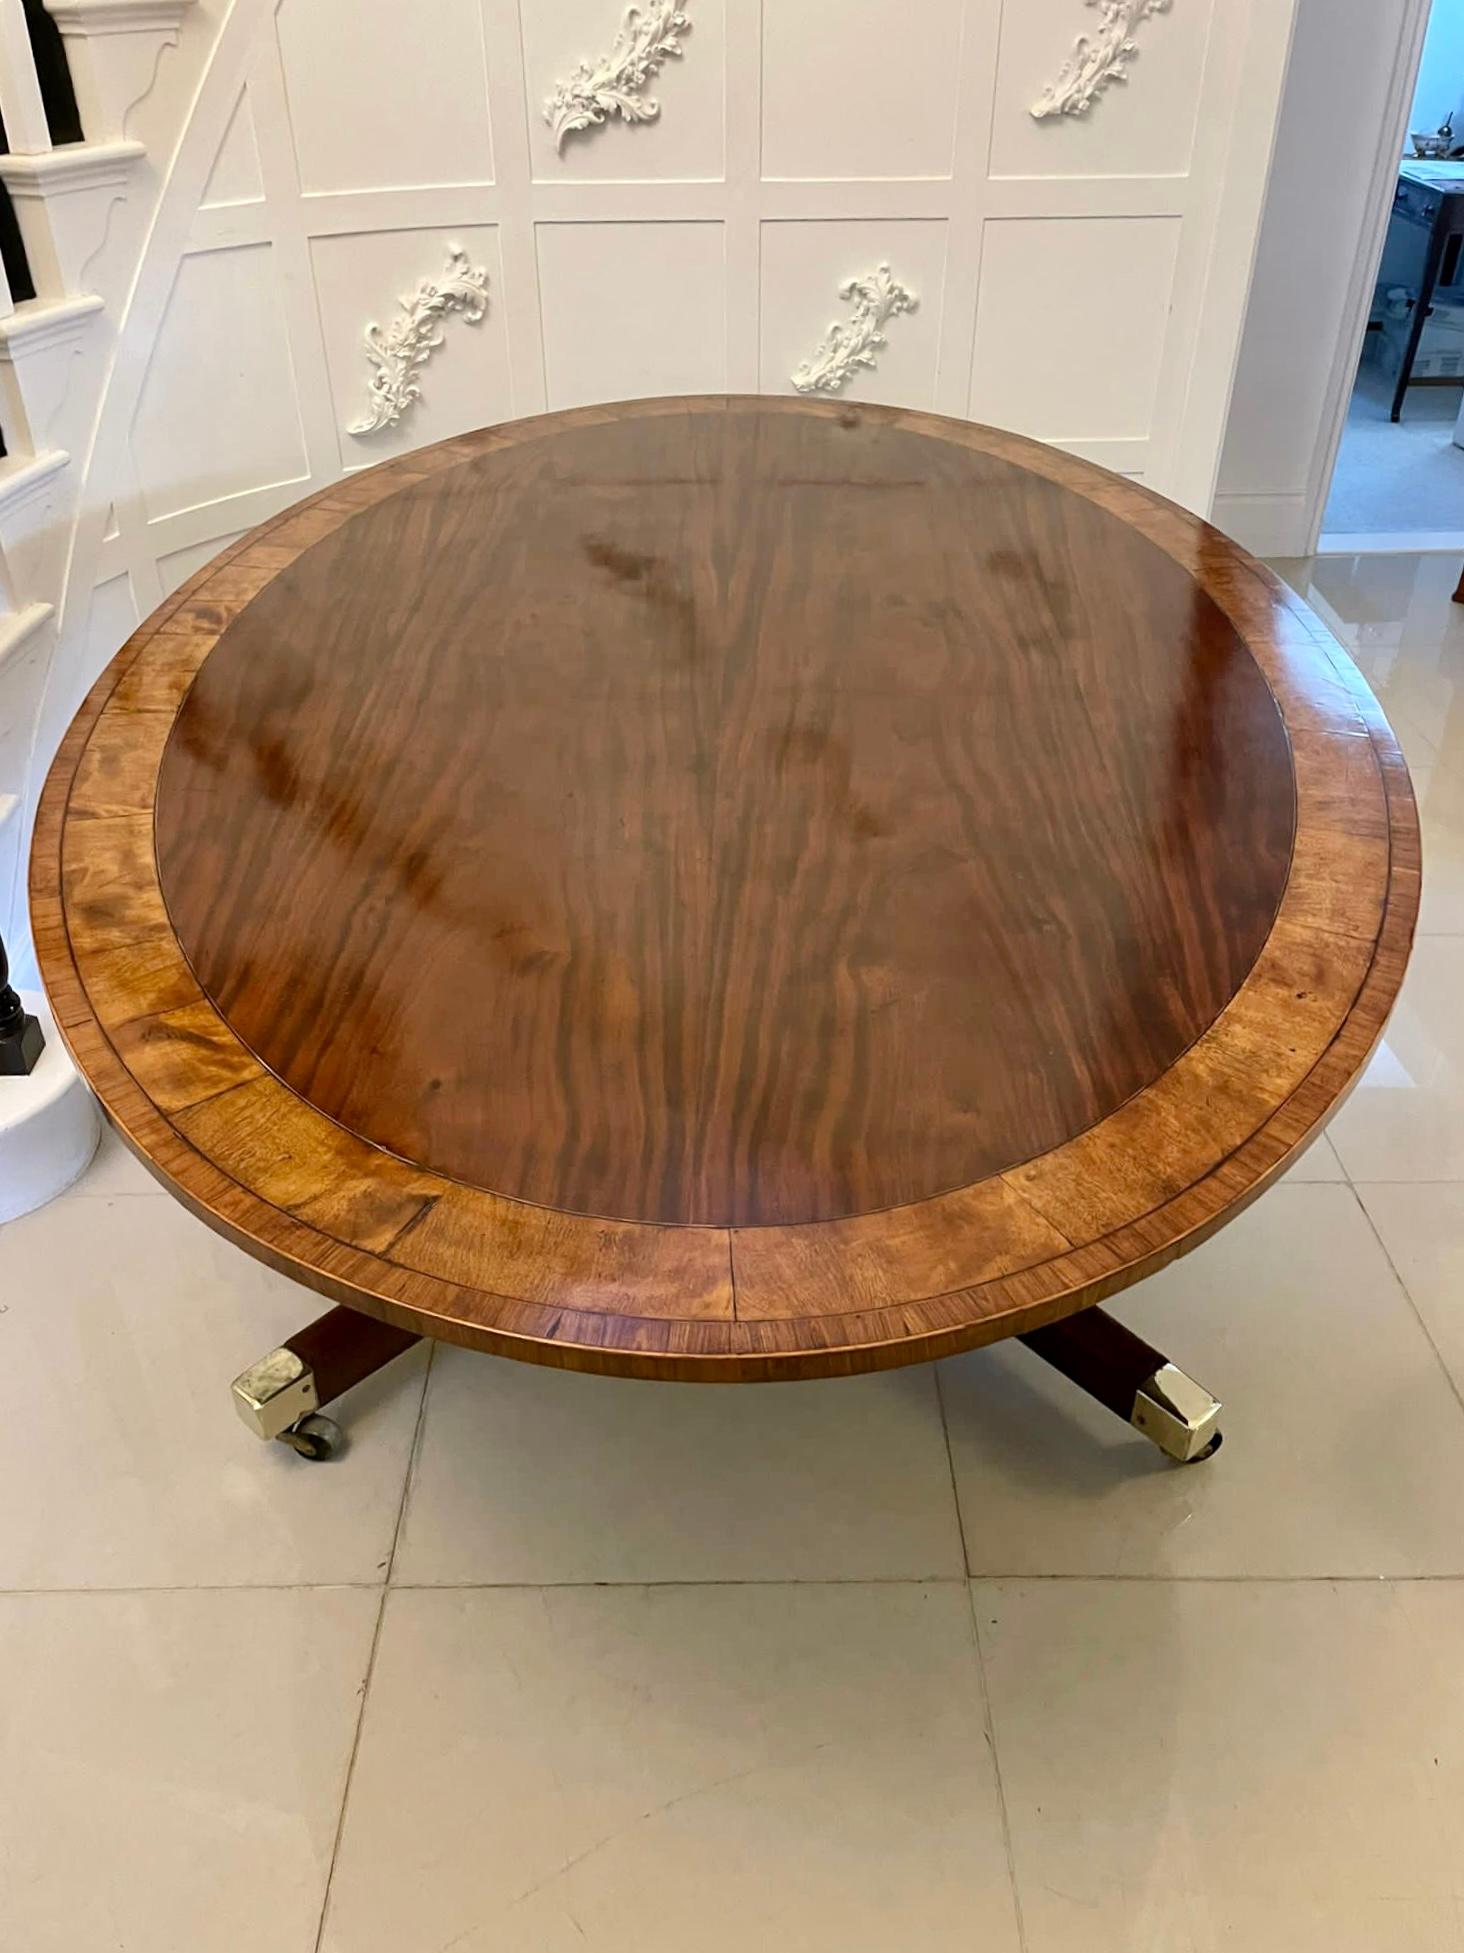 Rare large 10 seater antique George III oval quality mahogany dining table having a rare 7 feet oval figured mahogany tilt top crossbanded in satinwood supported on a fabulous turned pedestal column standing on four splayed inlaid mahogany sabra